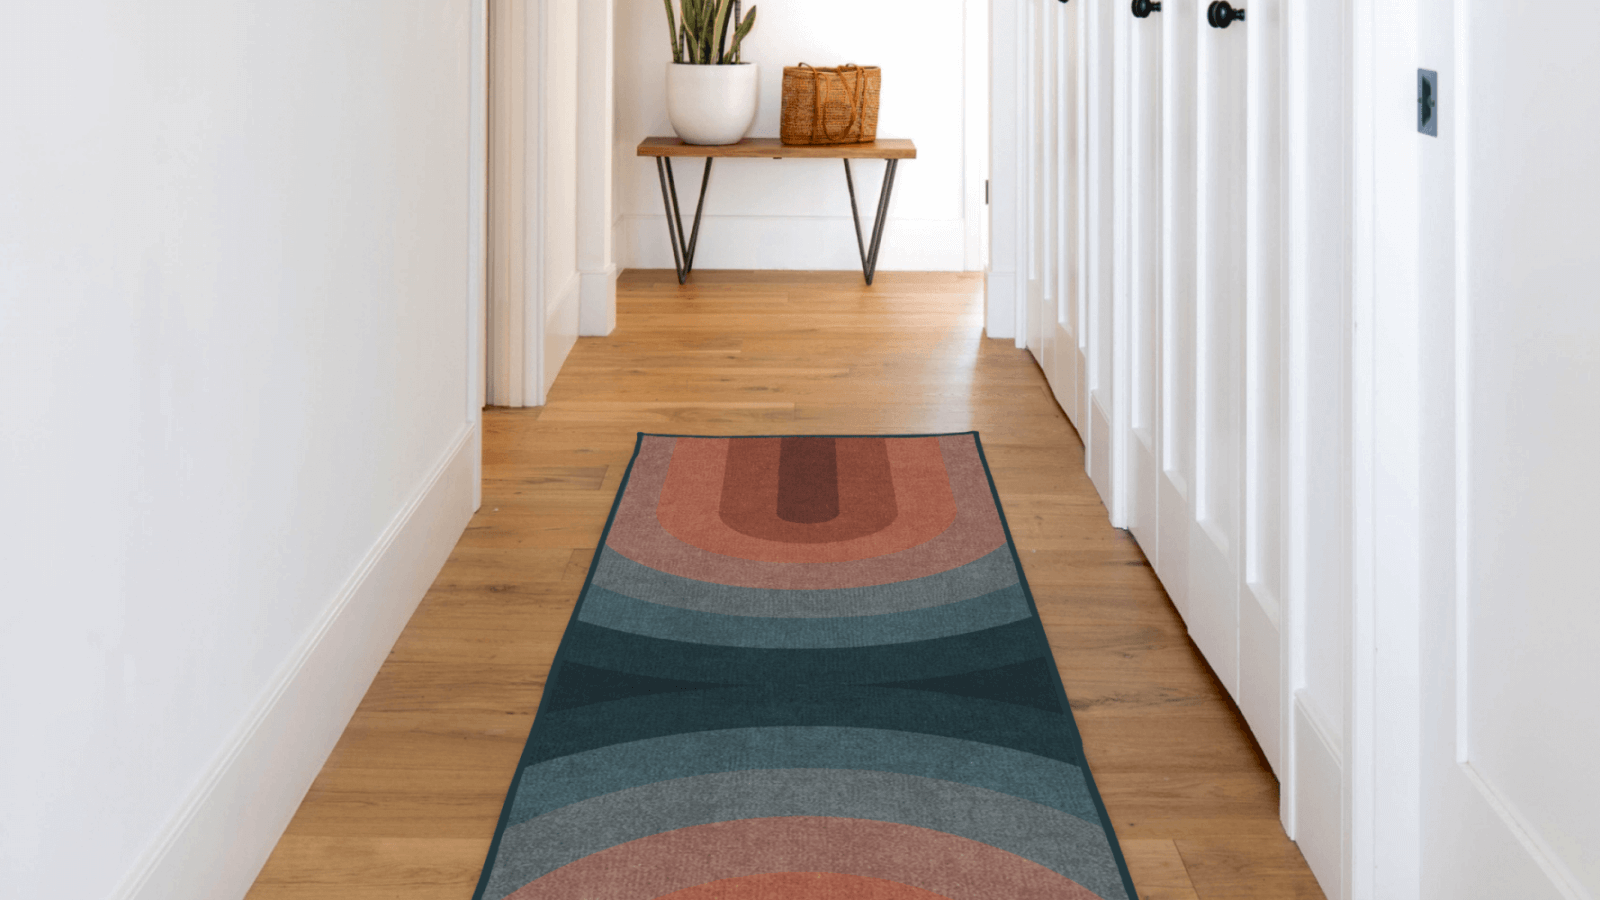 The Rug Size Guide: Rug Size For King Bed, Living Room, Dining